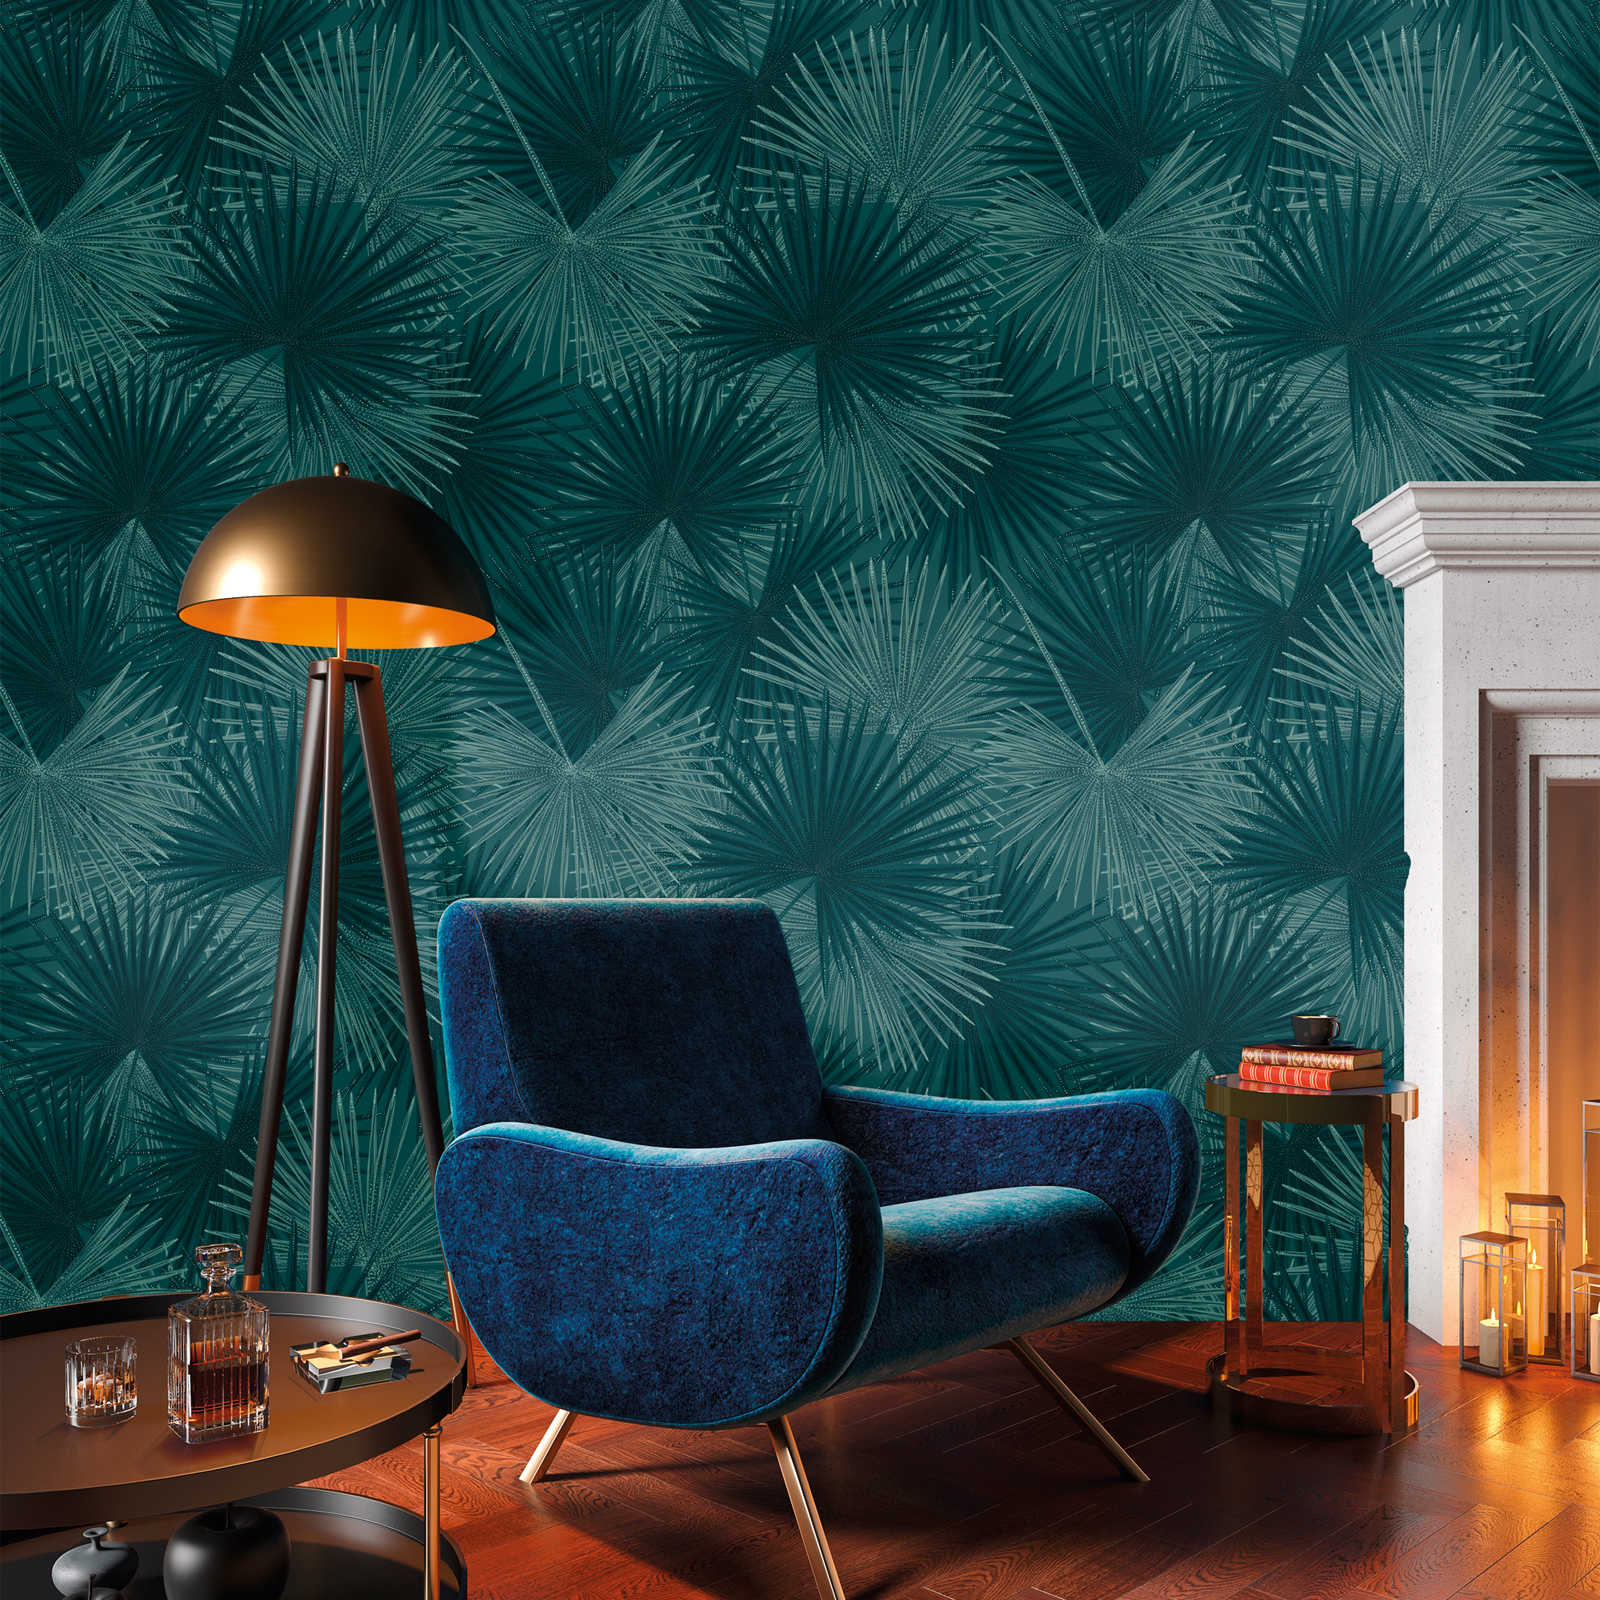 Leaf wallpaper with tropical plants - petrol
